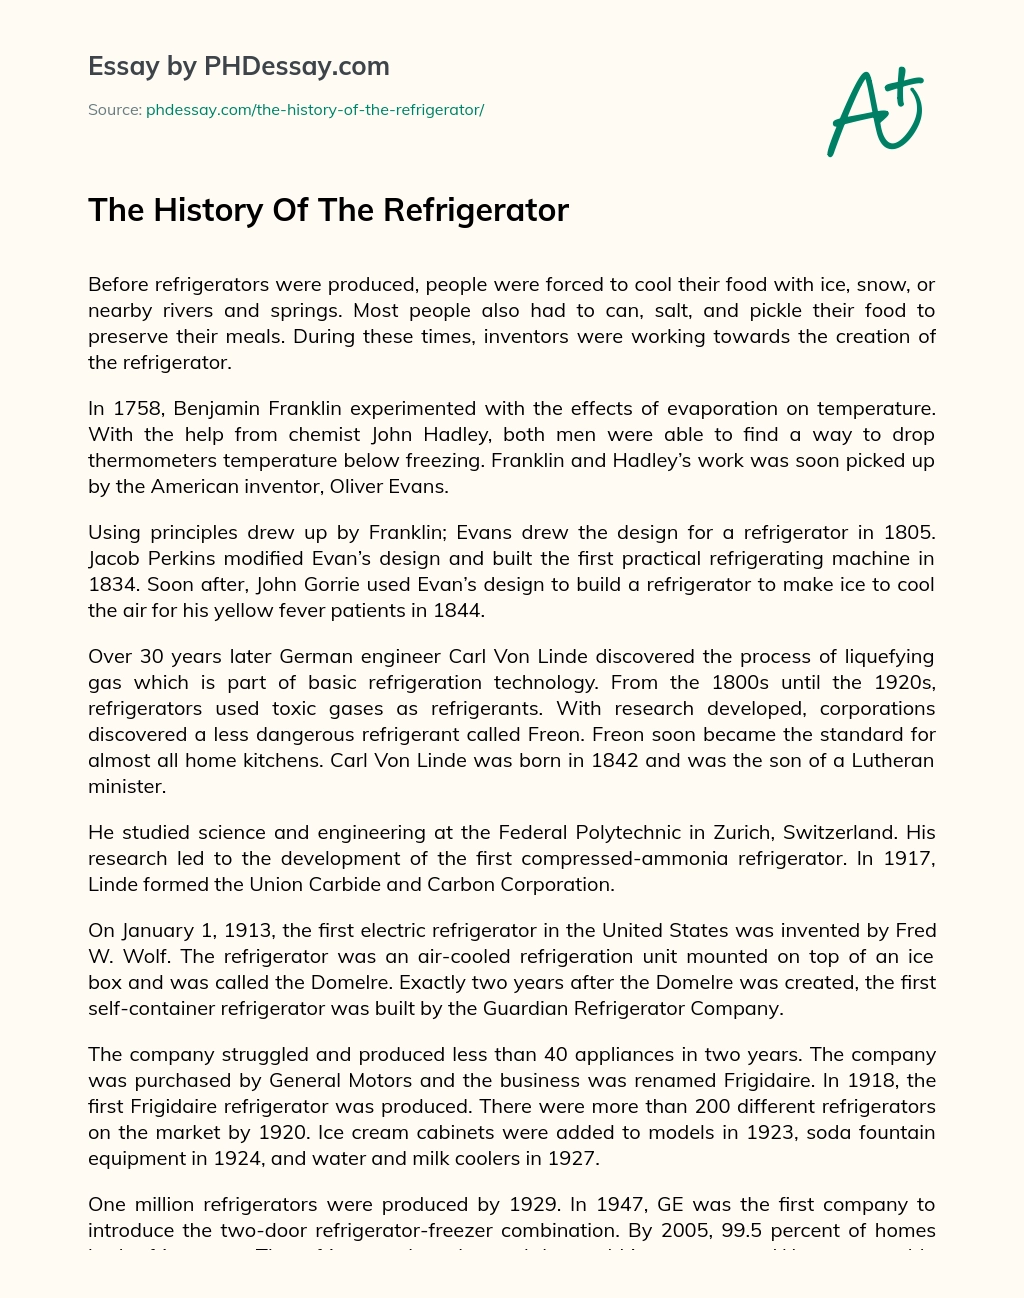 The History Of The Refrigerator essay